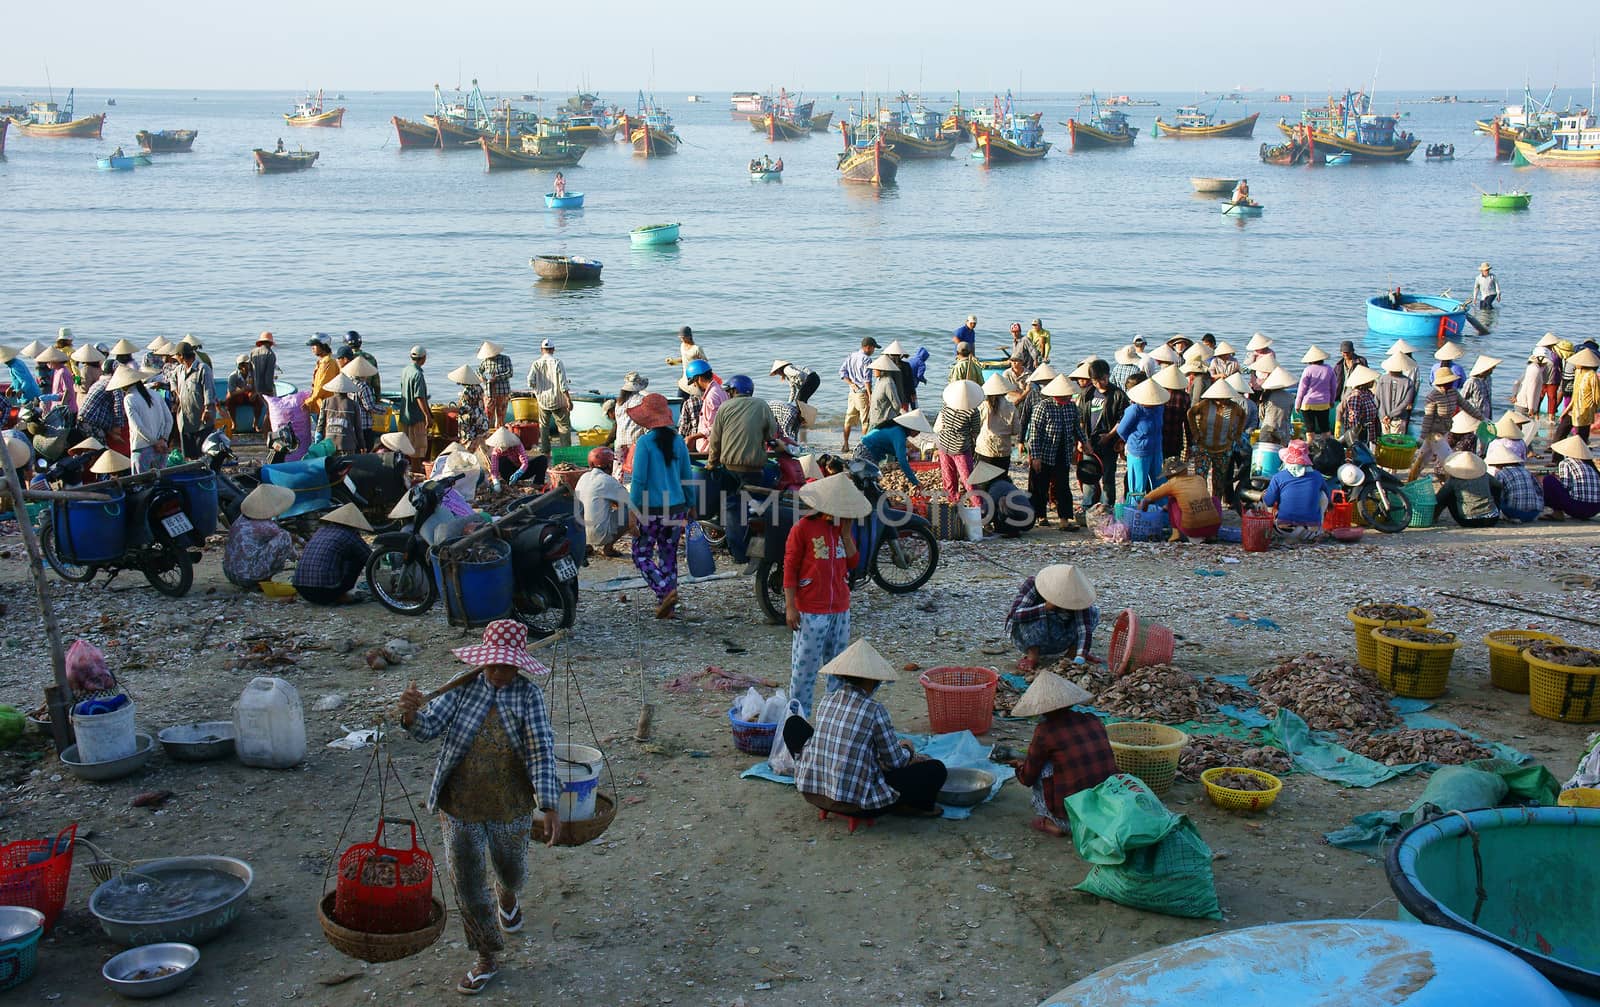 PHAN THIET- VIETNAM- JAN 21: Crowed atmosphere at outdoor seafood market on beach, people trader fishing product in morning, boat on water, man vs woman buy and sell fresh food, Viet Nam, Jan 21, 2014